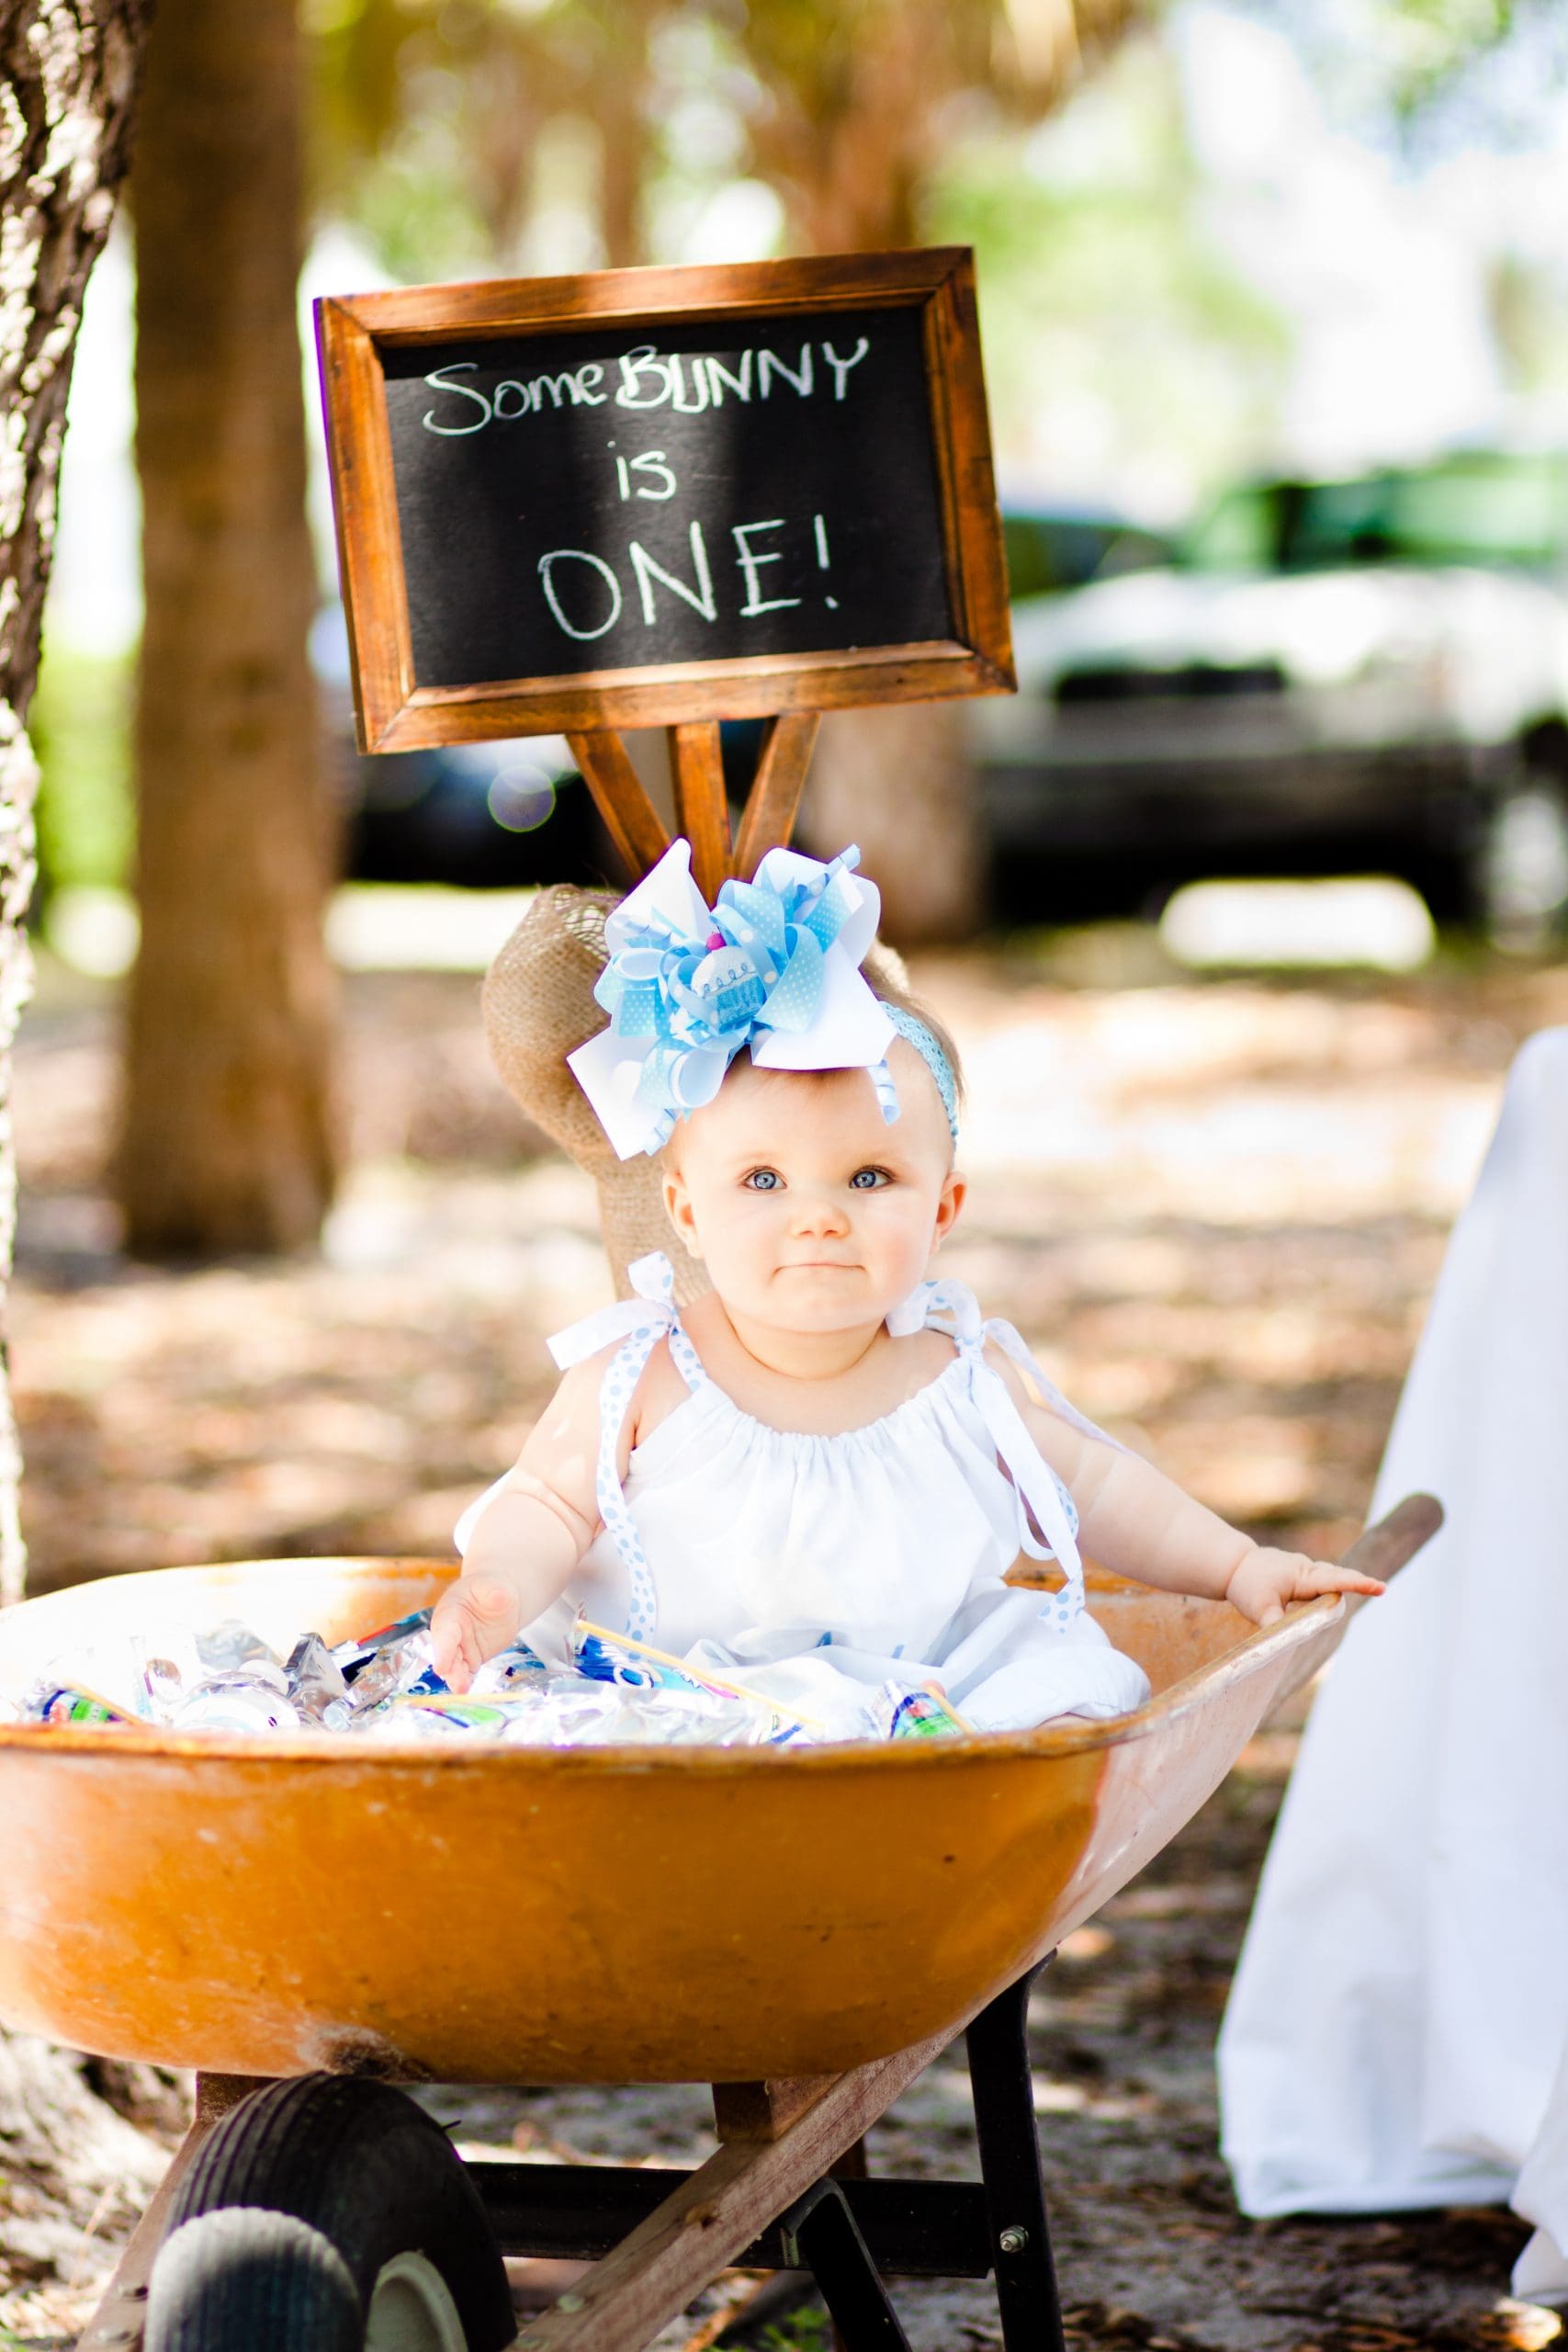 adorable baby Addy in a wheelbarrow with a sign that says "somebunny is one!"